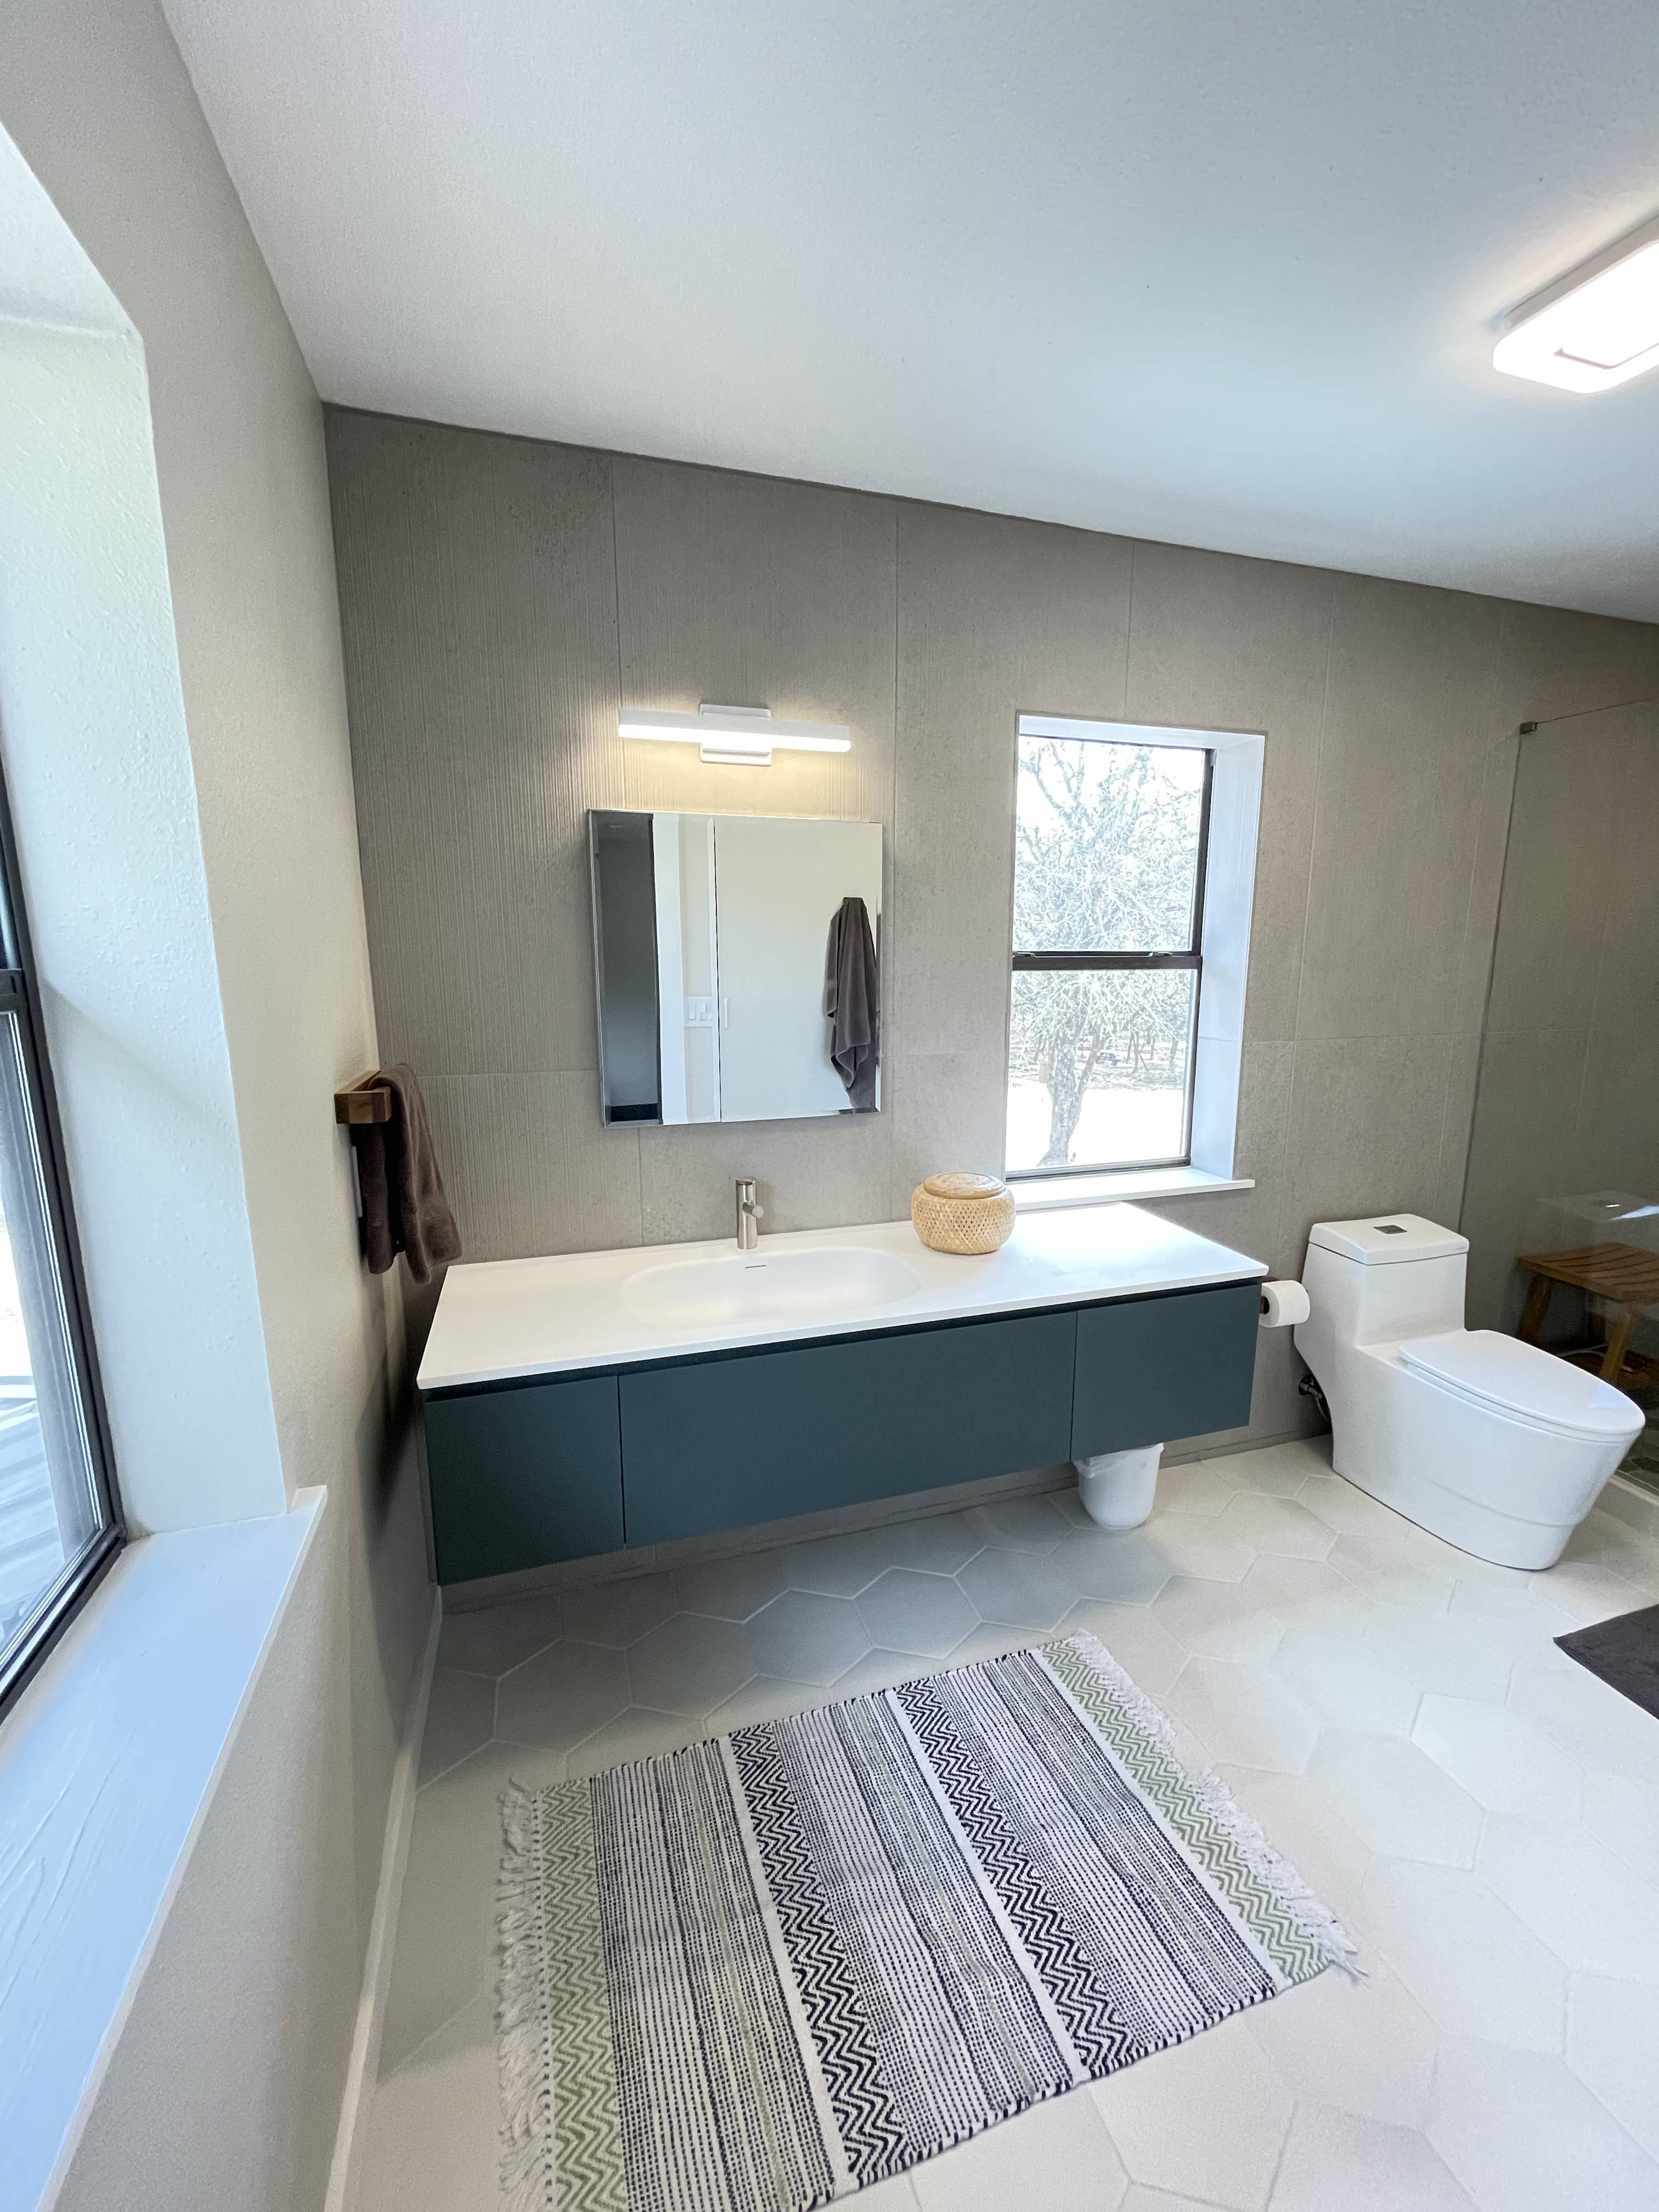 Best Bathroom Renovation In Central Texas, Serving San Marcos, Texas and Surrounding Cities